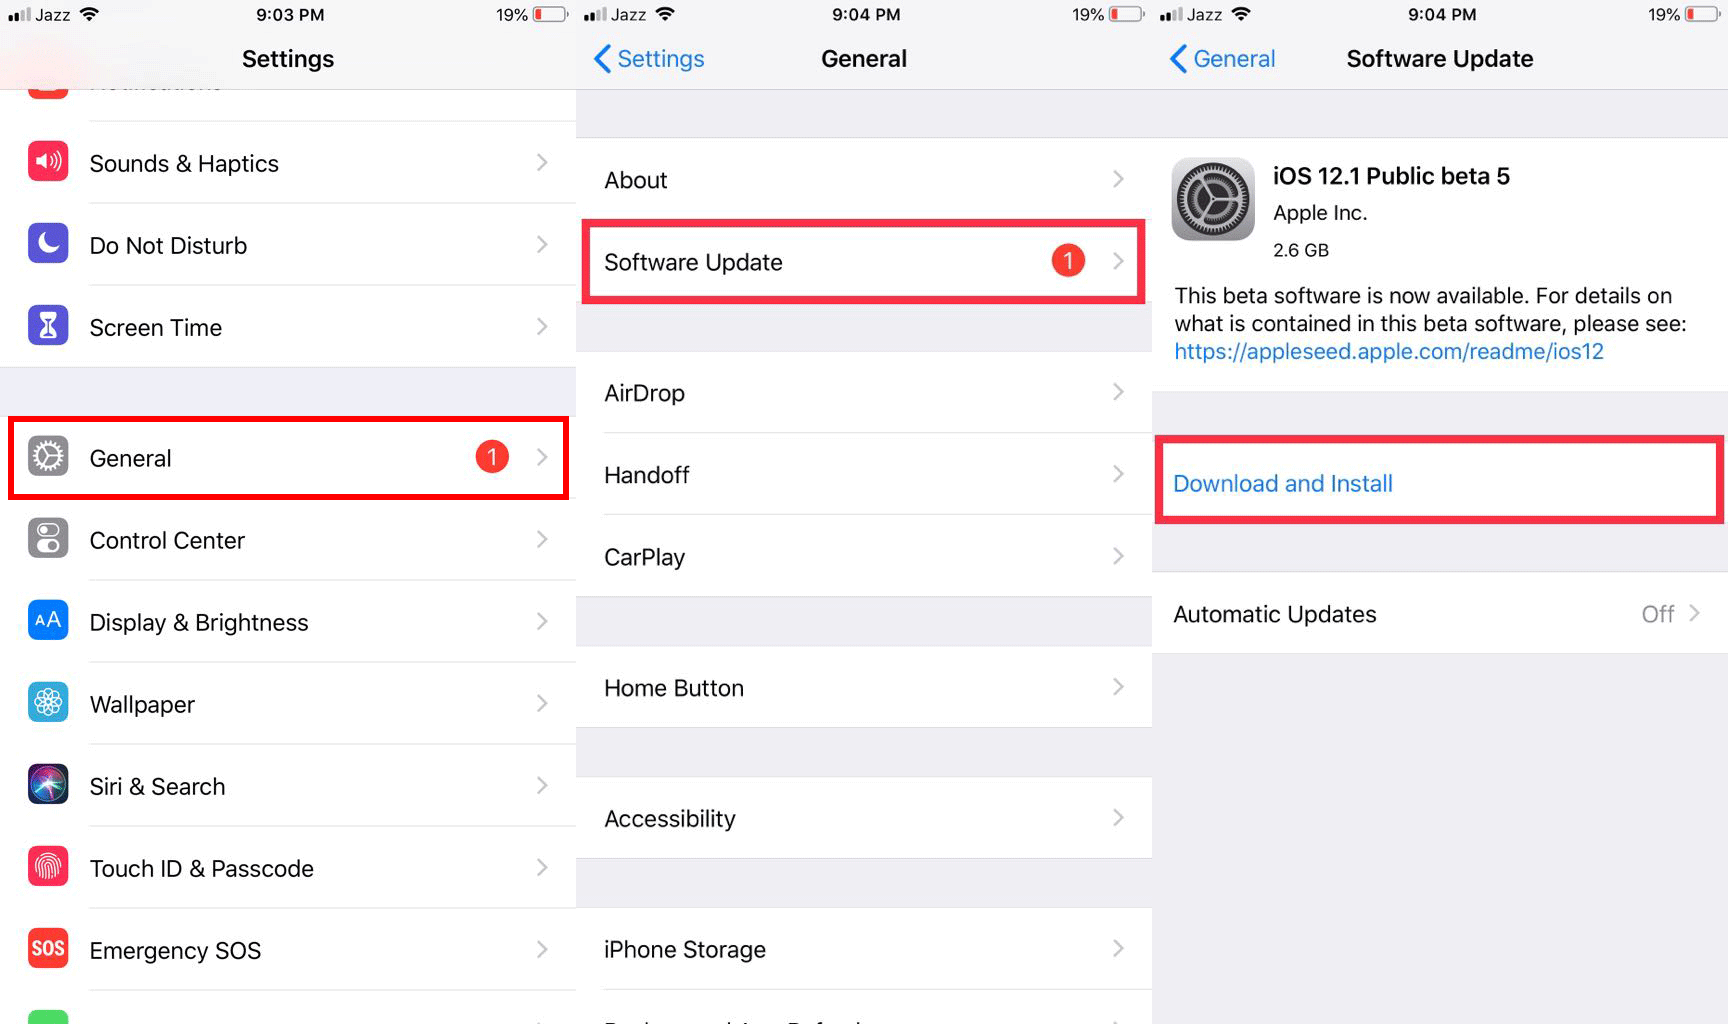 How to Speed Up Slow iPhone or iPad After iOS 12 Update